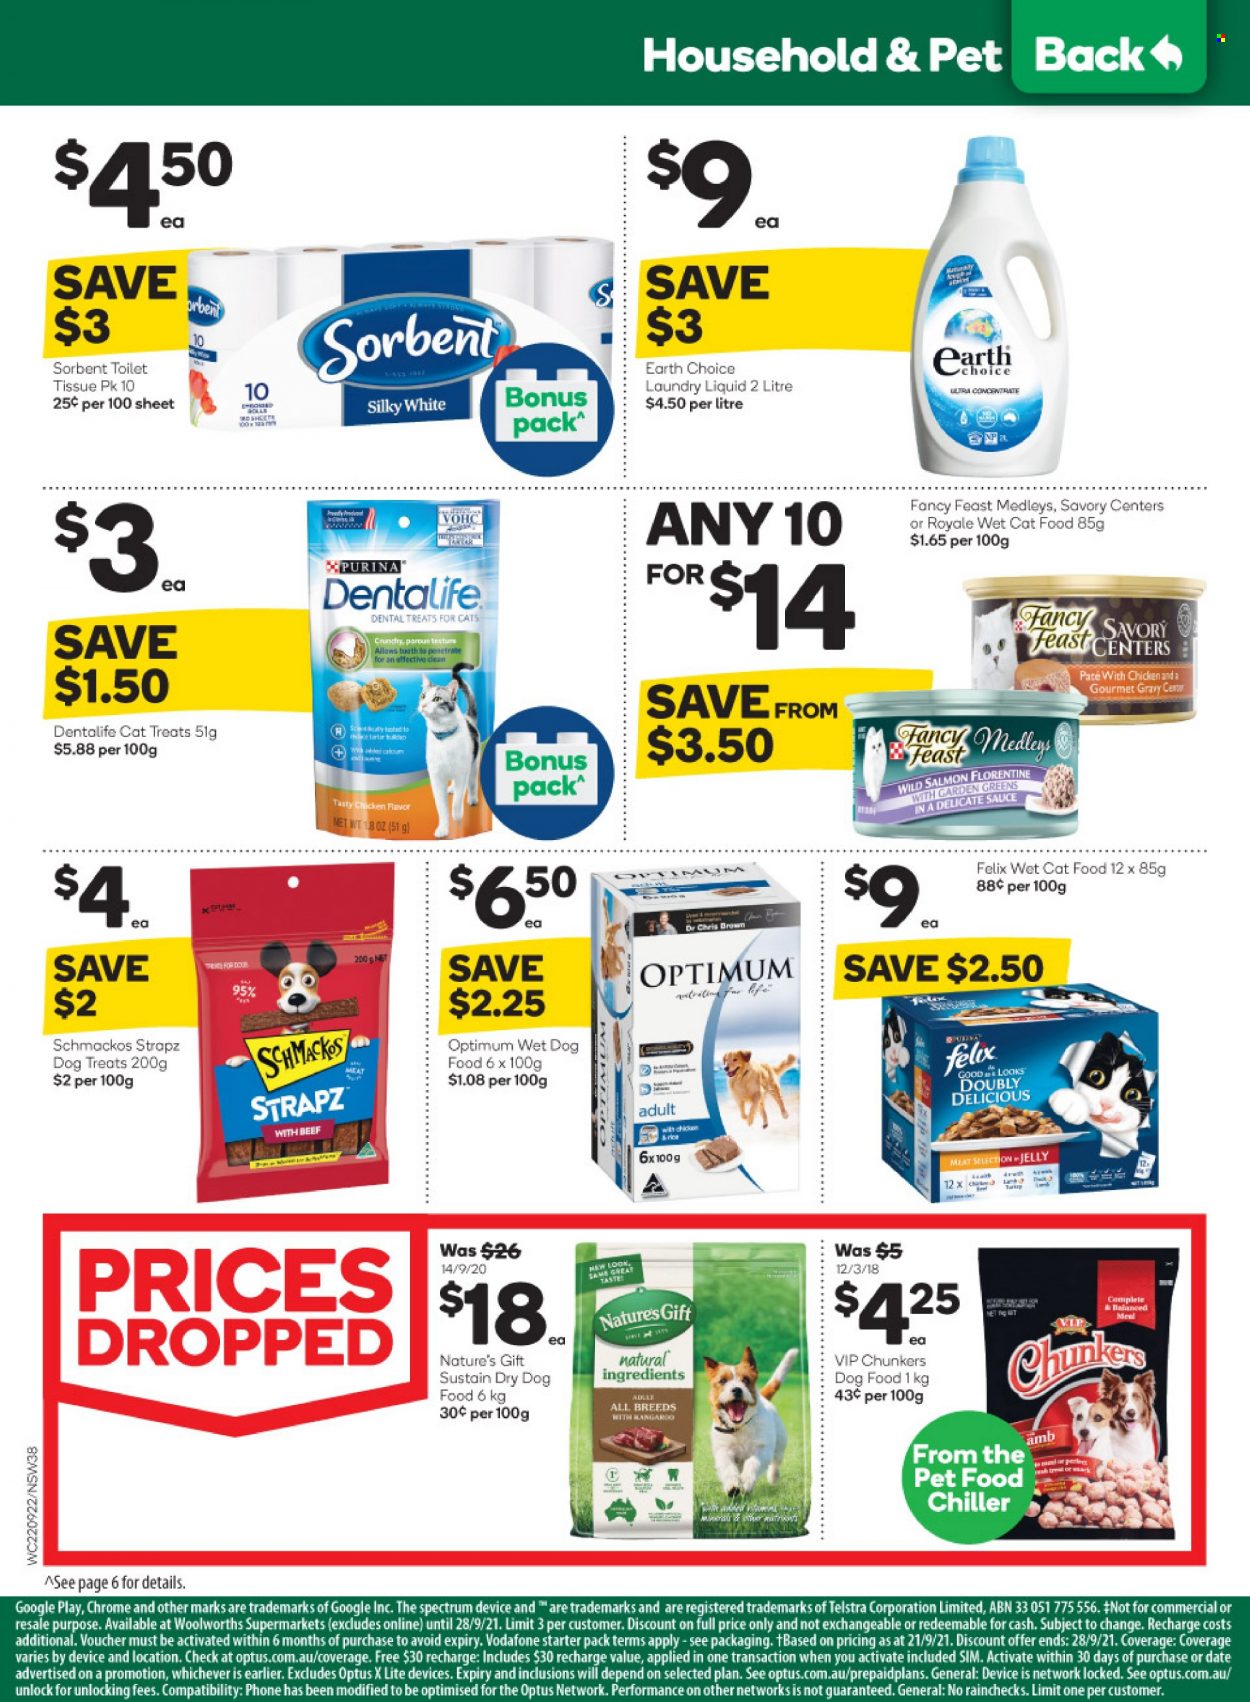 thumbnail - Woolworths Catalogue - 22 Sep 2021 - 28 Sep 2021 - Sales products - jelly, rice, tissues, laundry detergent, animal food, animal treats, cat food, dental treats, dog food, wet dog food, Purina, Optimum, Felix, Strapz, Schmackos, Dentalife, dry dog food, Fancy Feast, wet cat food, Spectrum. Page 38.